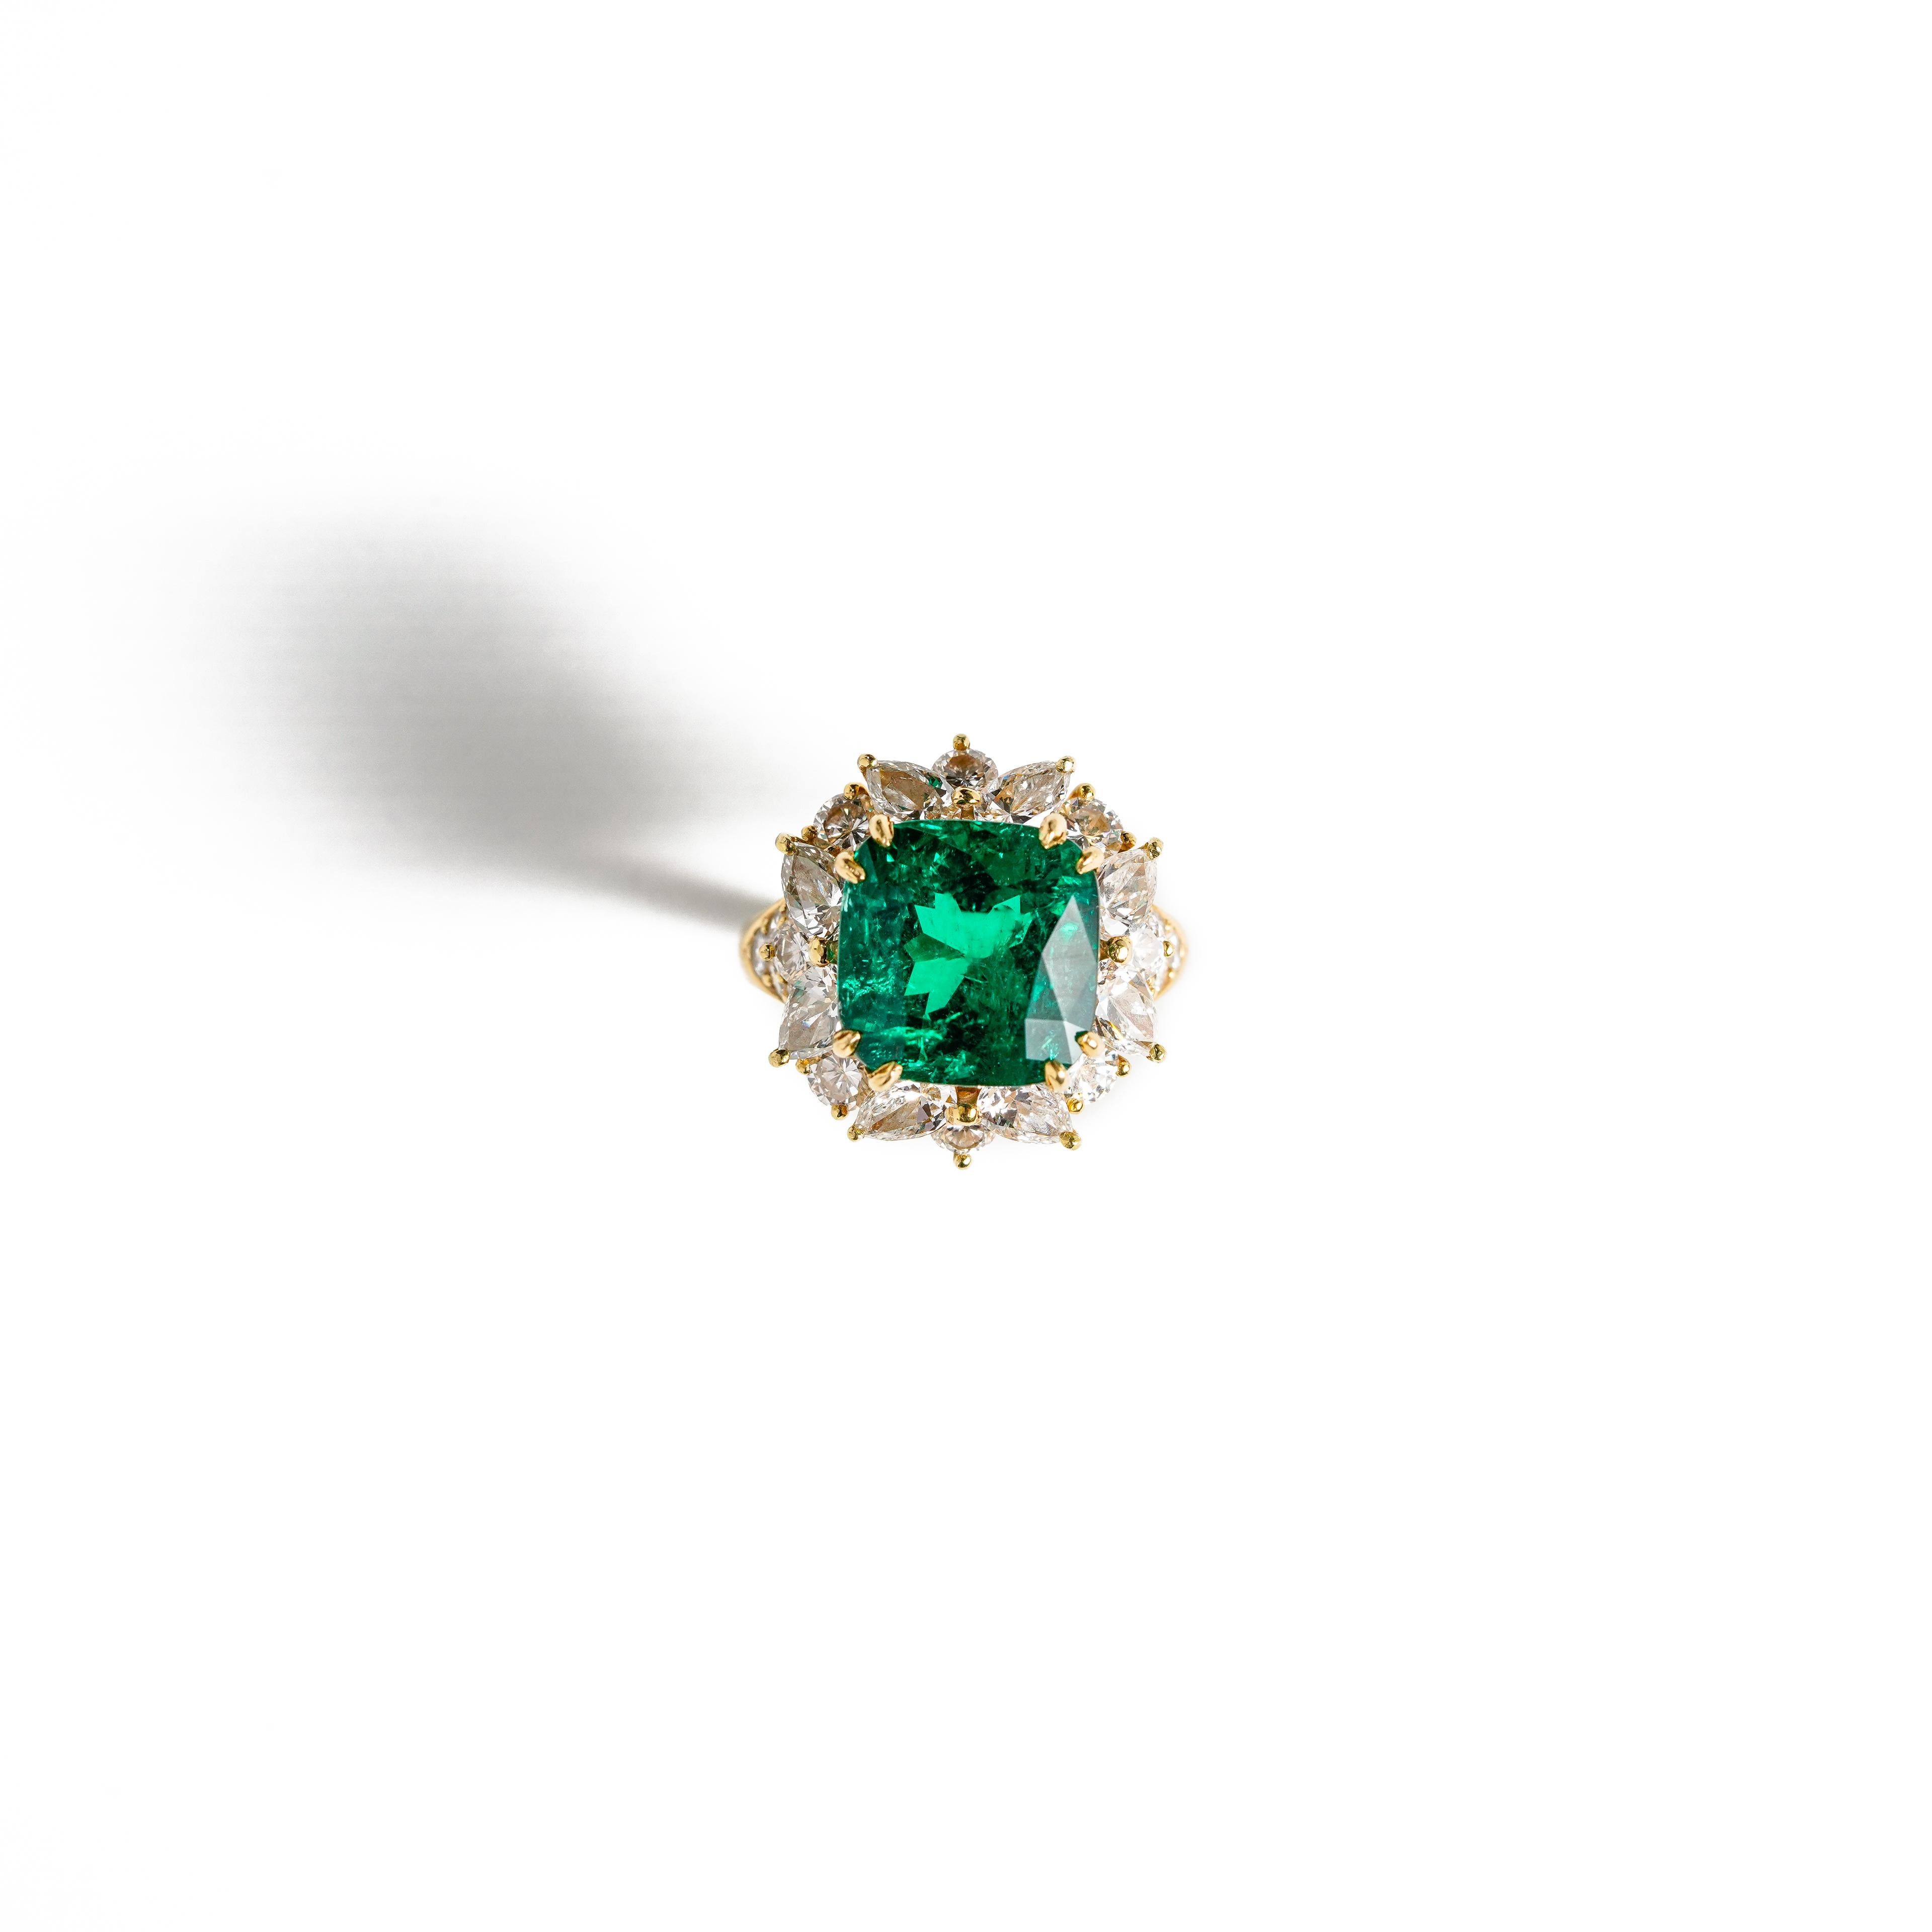 The Colombian Emerald has always been the most desirable of all the emeralds and this one is no exception. Crafted in 18k yellow gold featuring one square cushion Colombian emerald weighing 8.39ct and has minor to moderate clarity enhancement. The